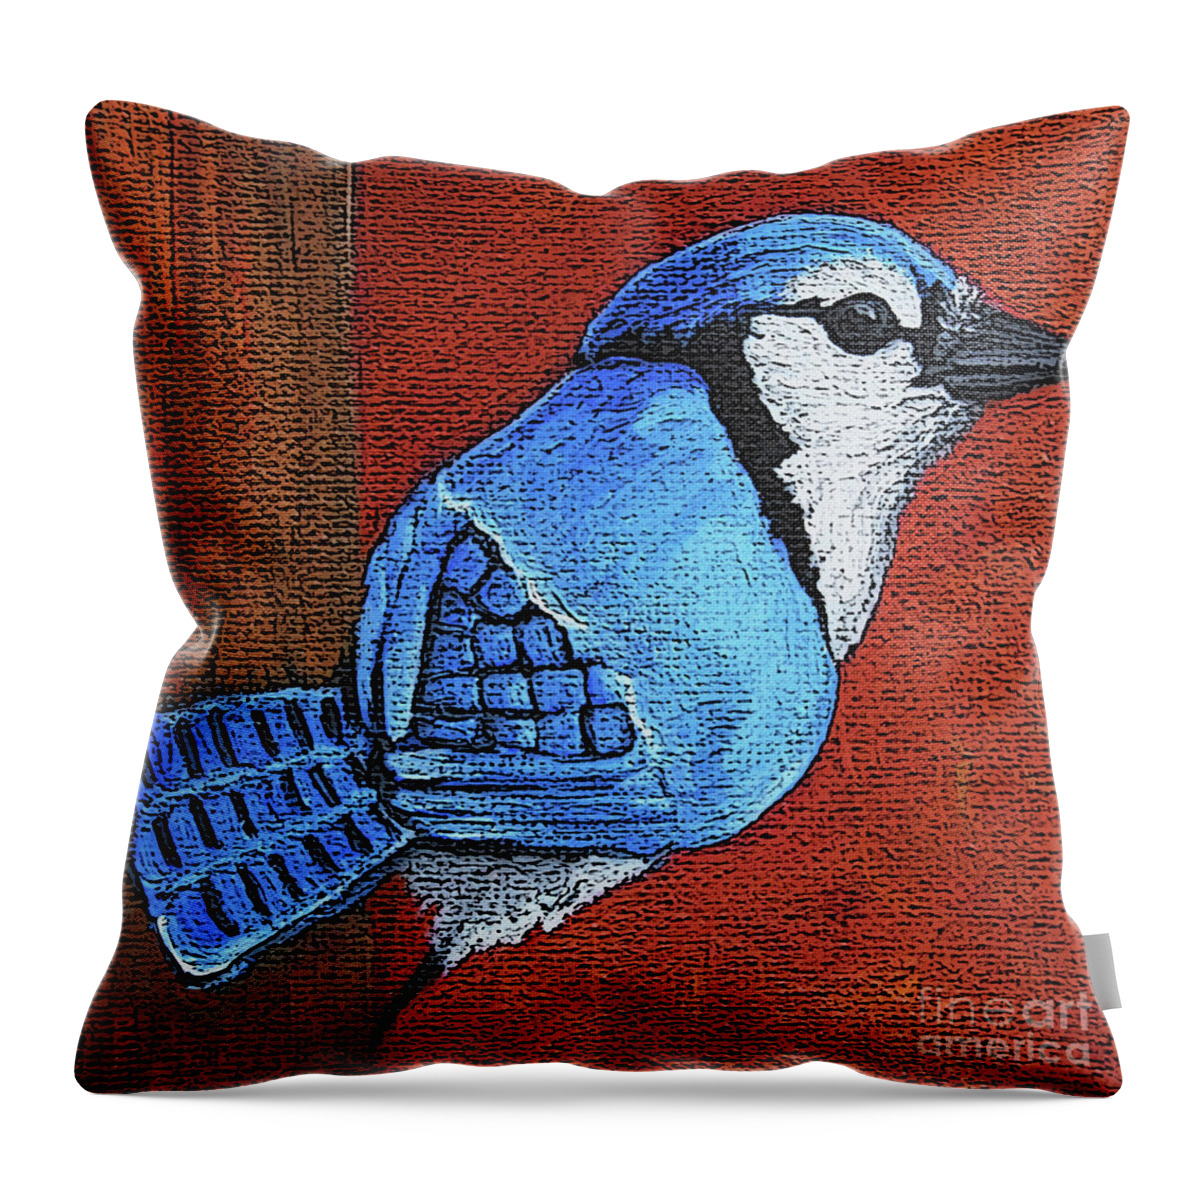 Blue Jay Throw Pillow featuring the painting 36 Blue Jay by Victoria Page